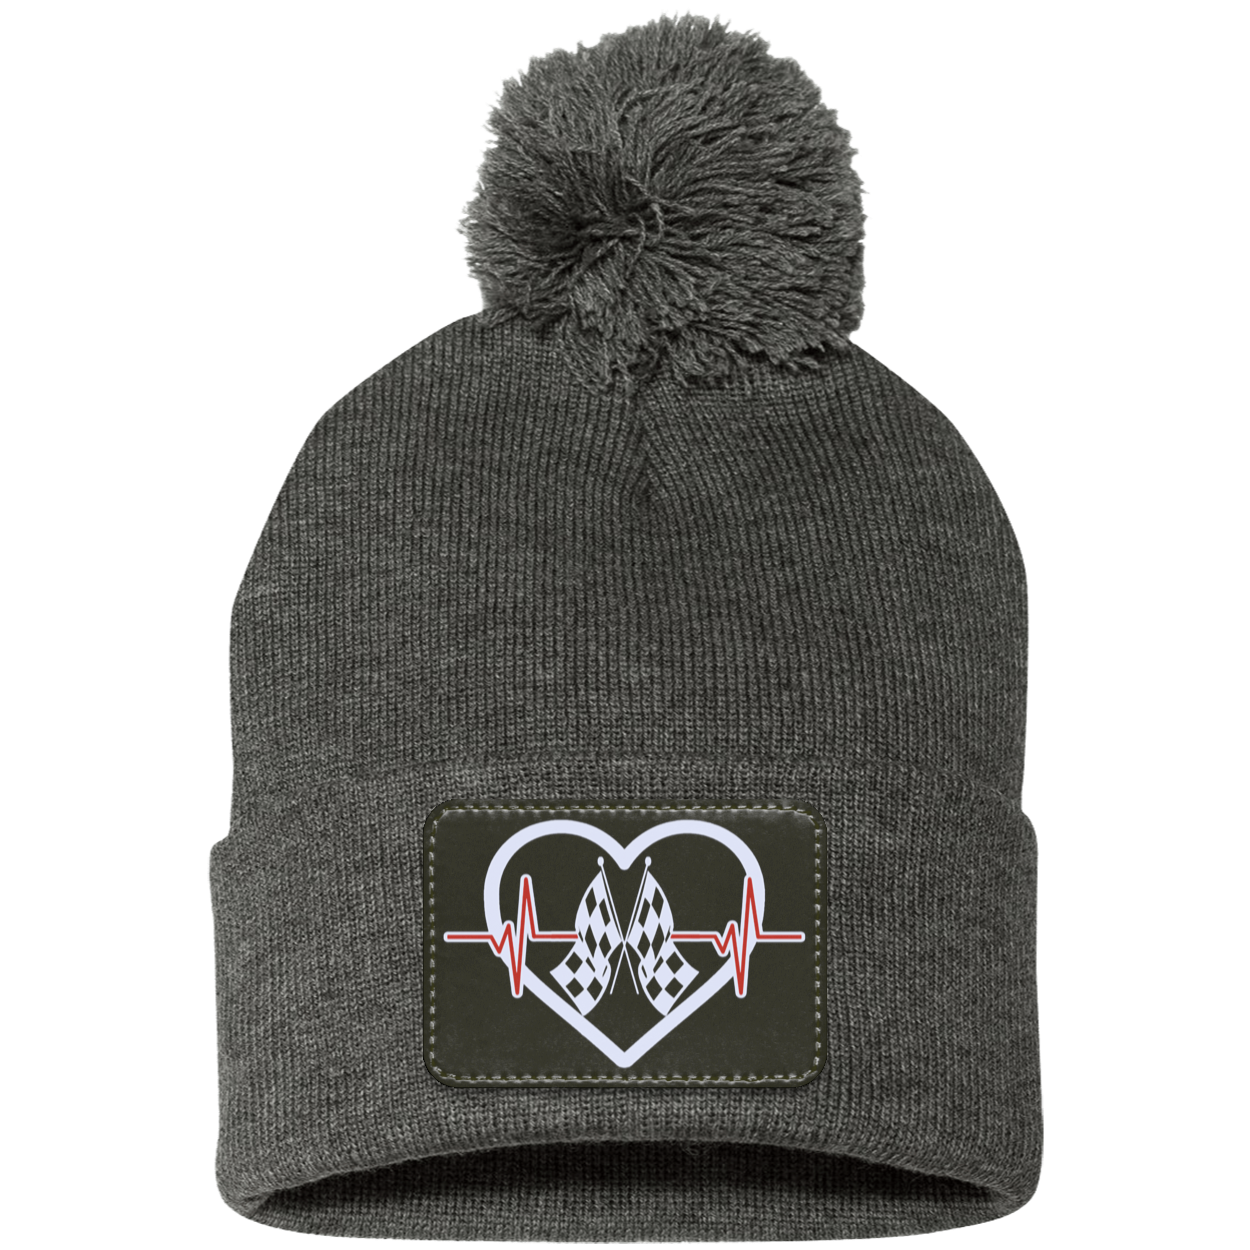 Racing Heartbeat Patched Pom Pom Knit Cap